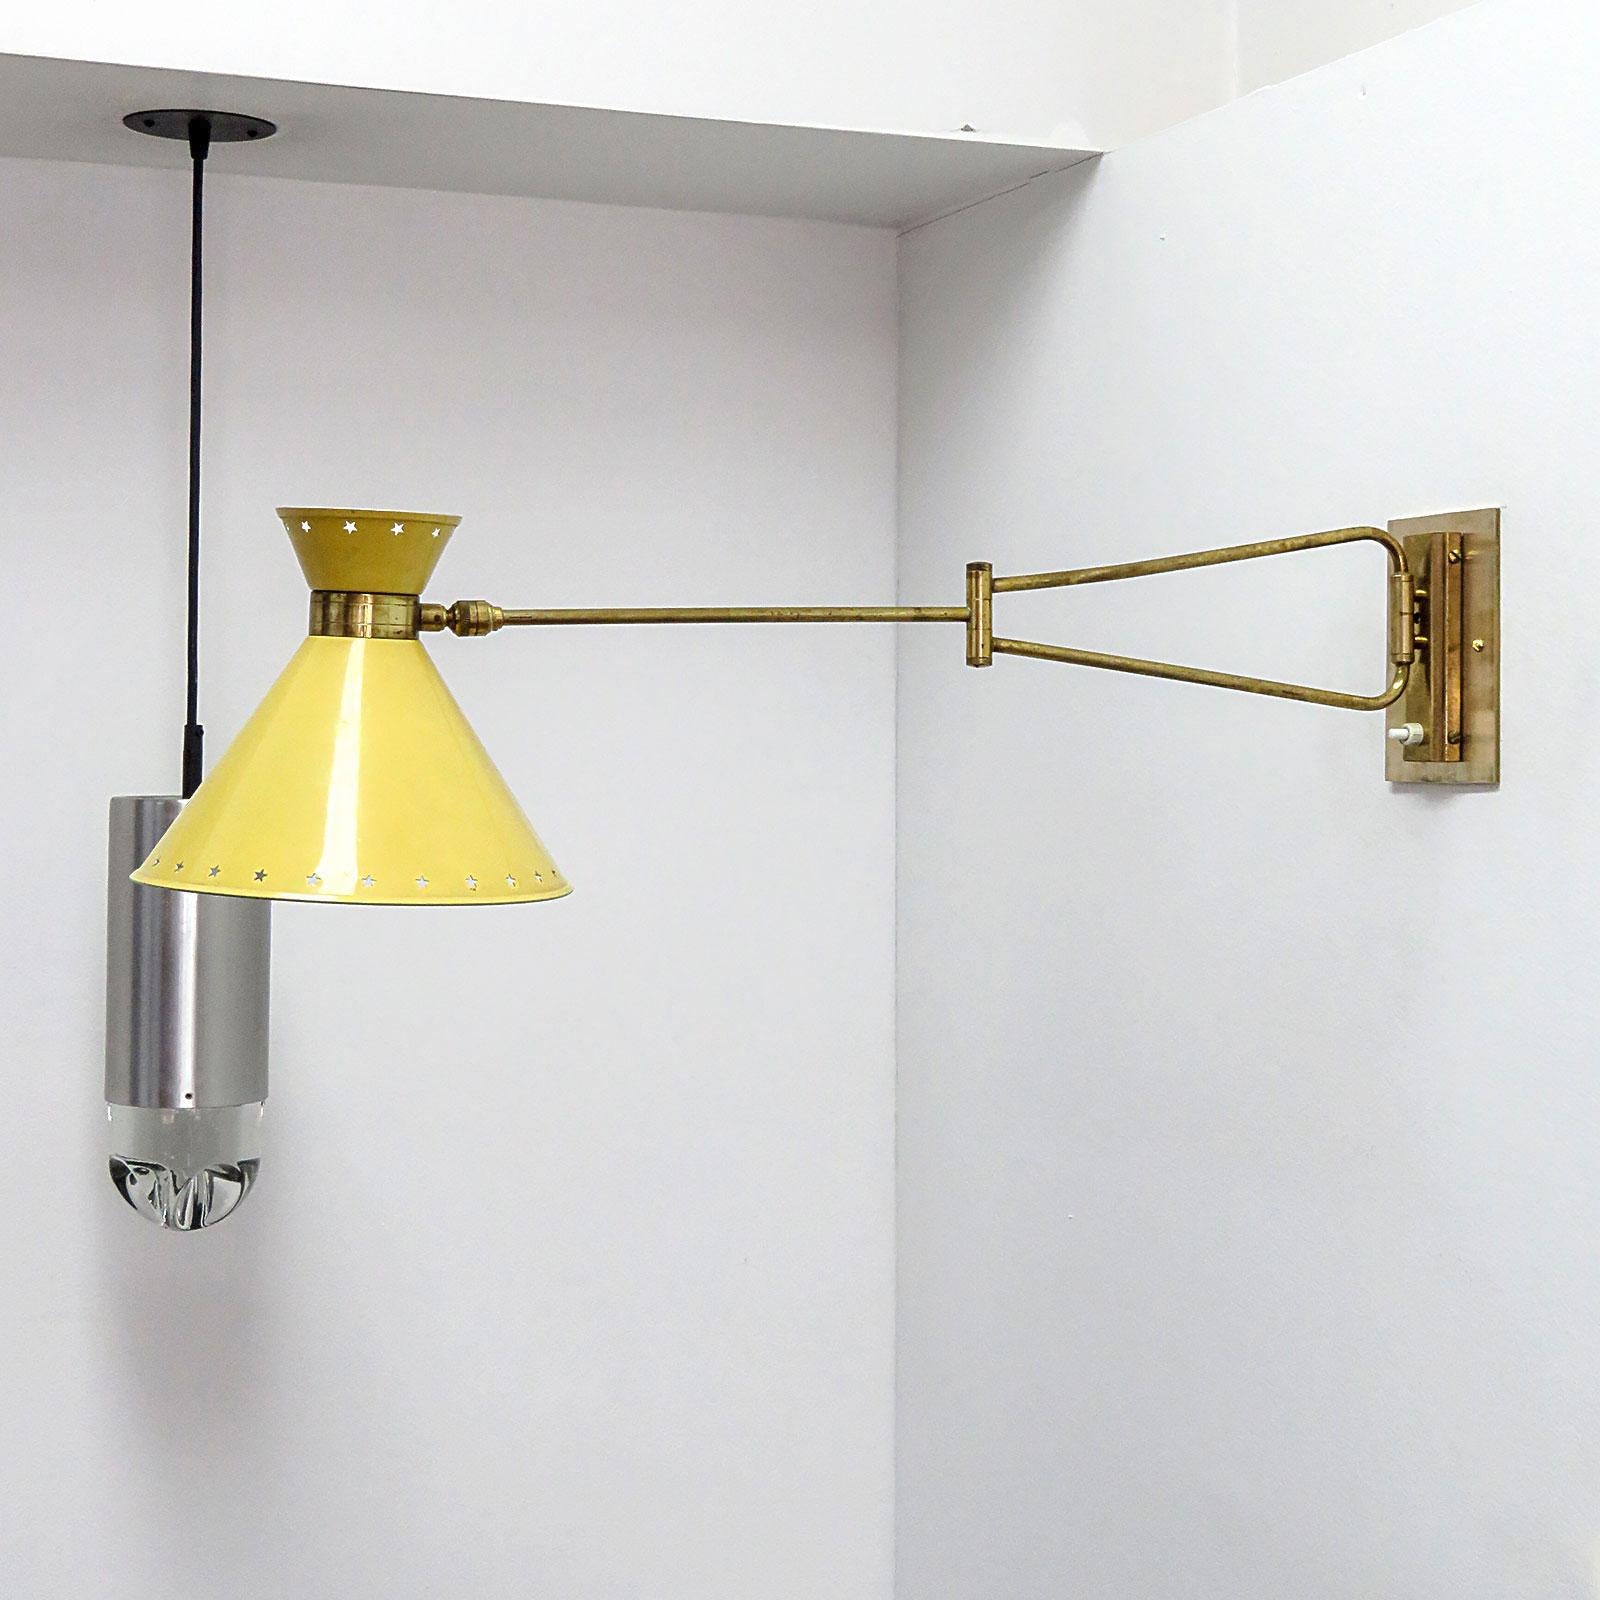 Swing Arm Wall Light by Rene Mathieu for Lunel, 1950 In Good Condition For Sale In Los Angeles, CA